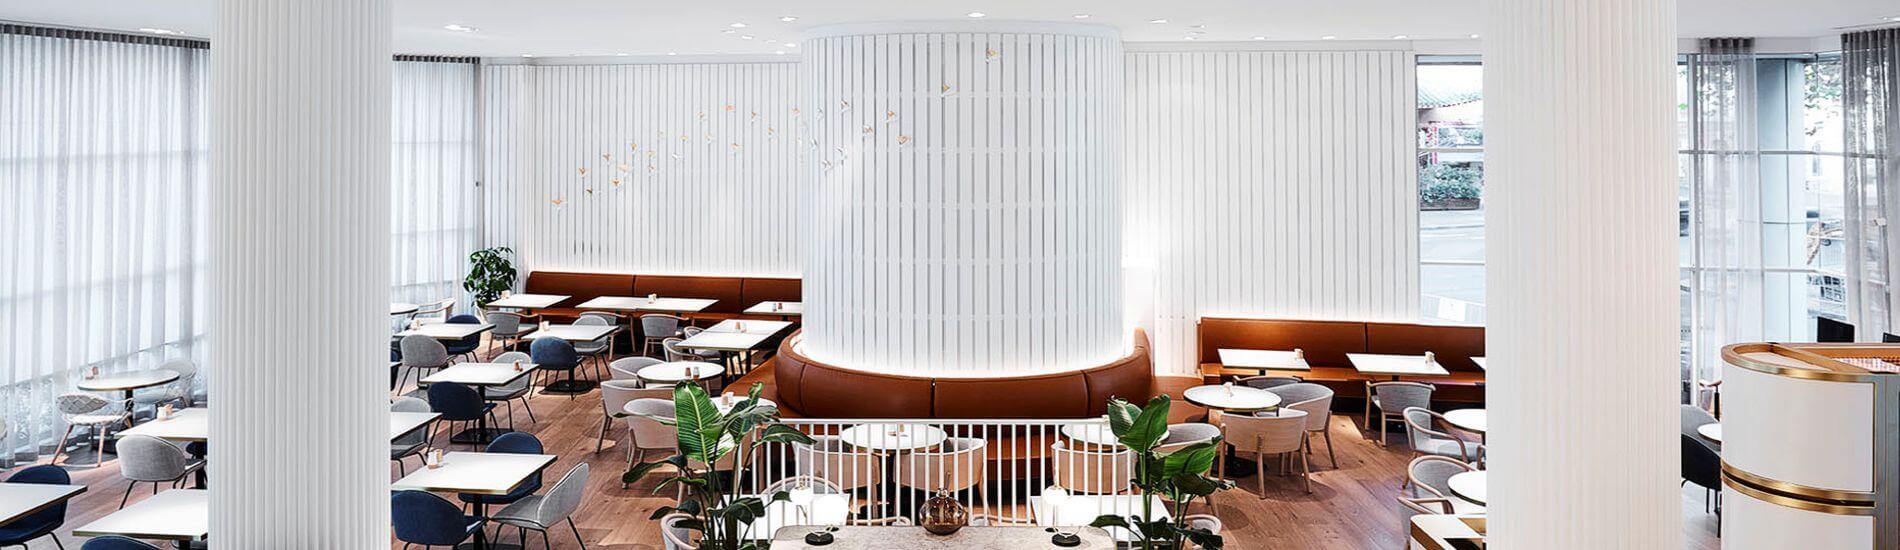 SUPASLAT Slatted White Wall Panels Create Aesthetics and Noise Control in Restaurant